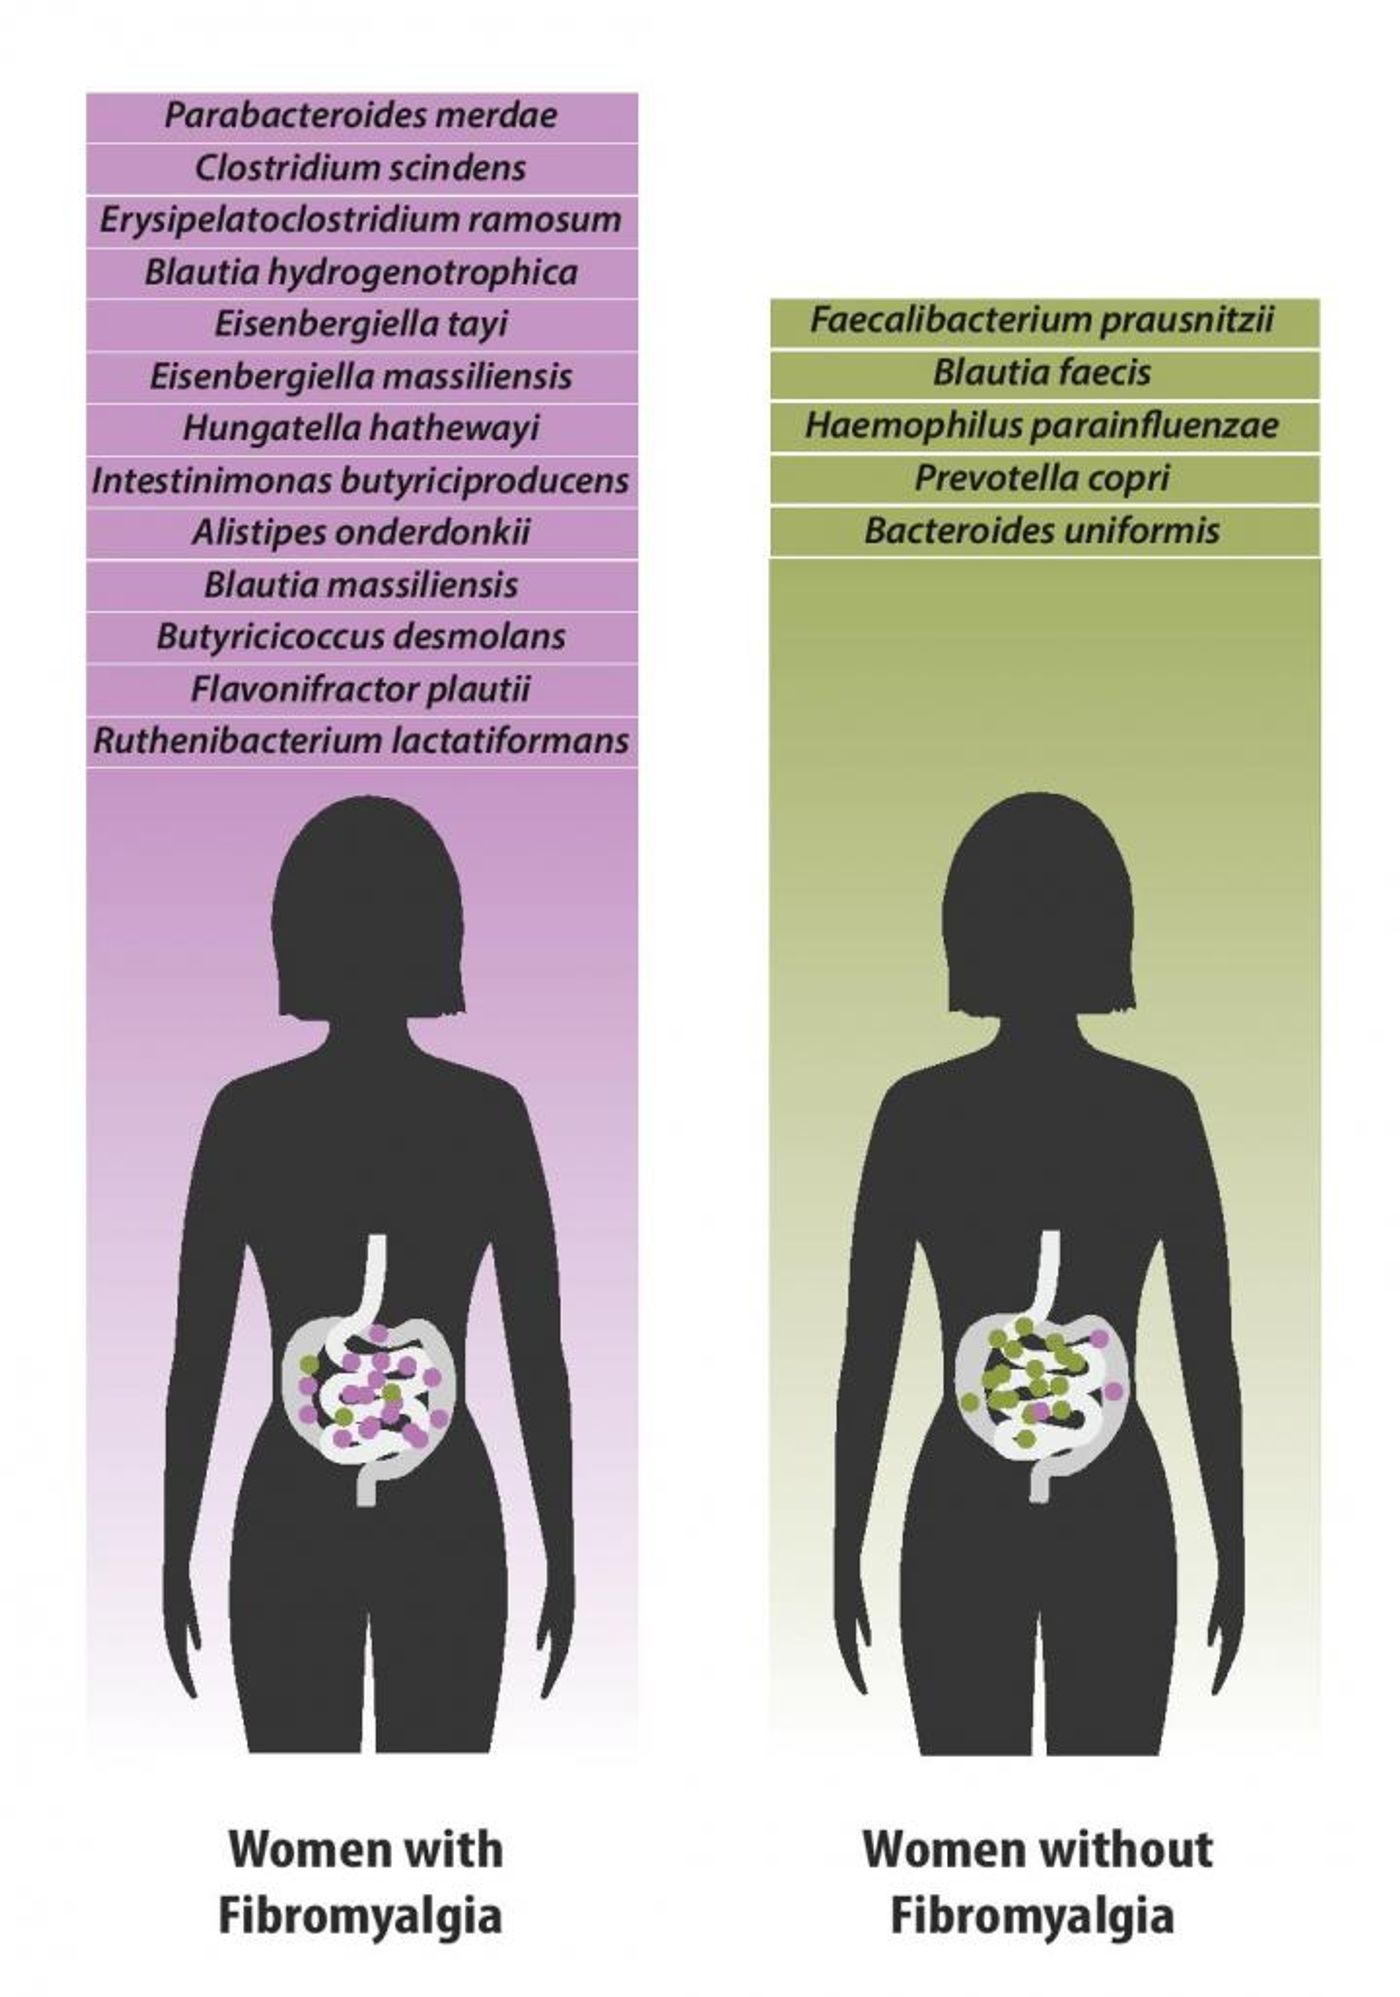 Bacterial species which were found in greater quantities in individuals with fibromyalgia (left) versus species which were found in greater quantities in healthy individuals (right). / Credit: Dr. Amir Minerbi